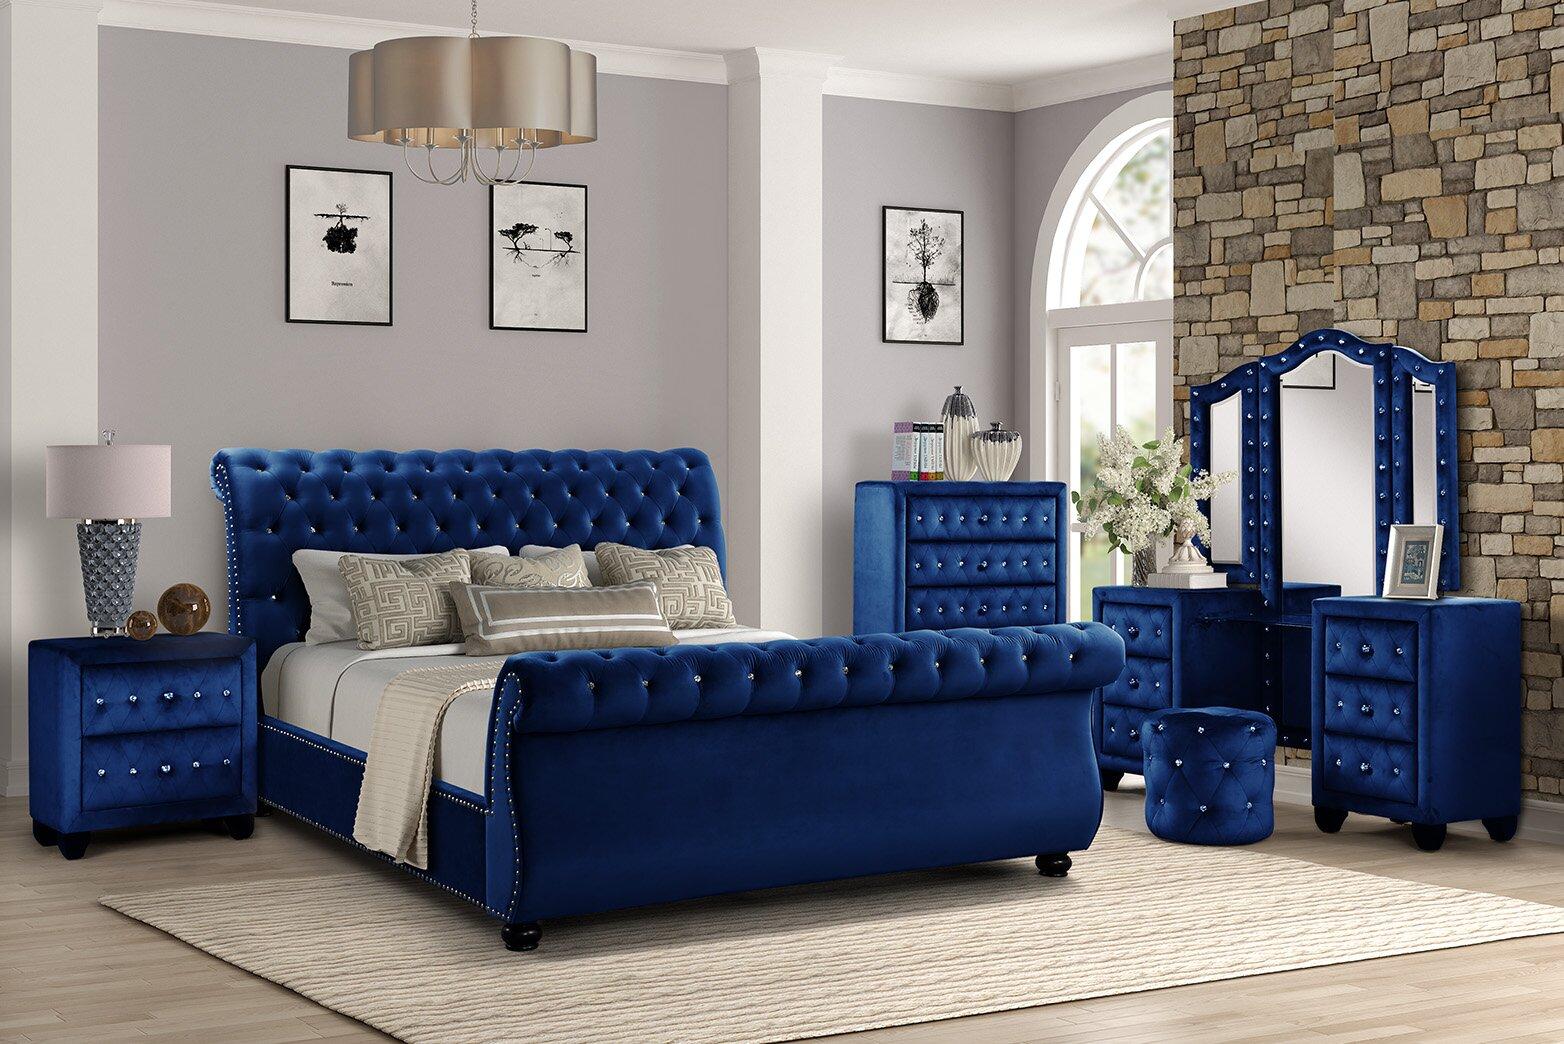 

    
Glam Blue Velvet King Bed Set 5Pcs w/VANITY KENDALL Galaxy Home Contemporary
